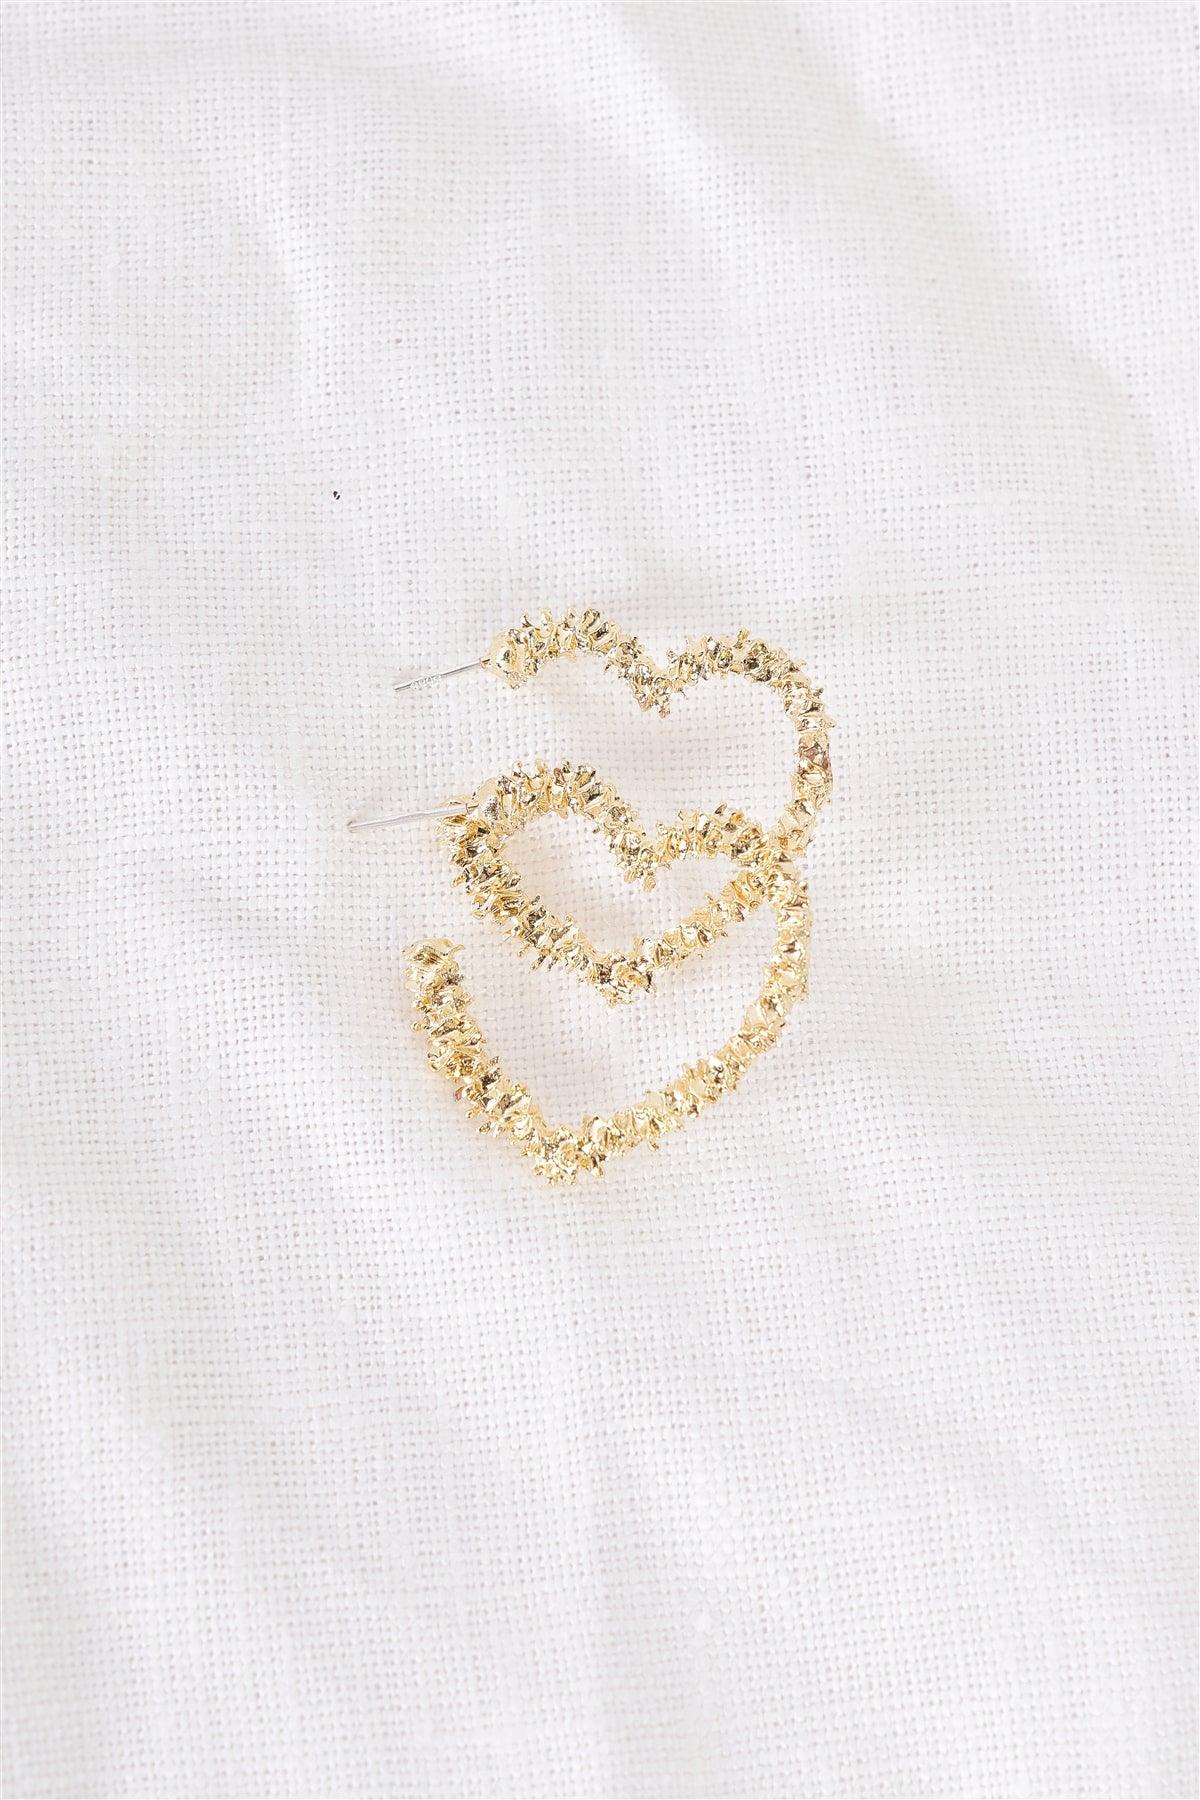 Shaved Gold Crust Heart Shaped Stud Earrings /3 Pieces